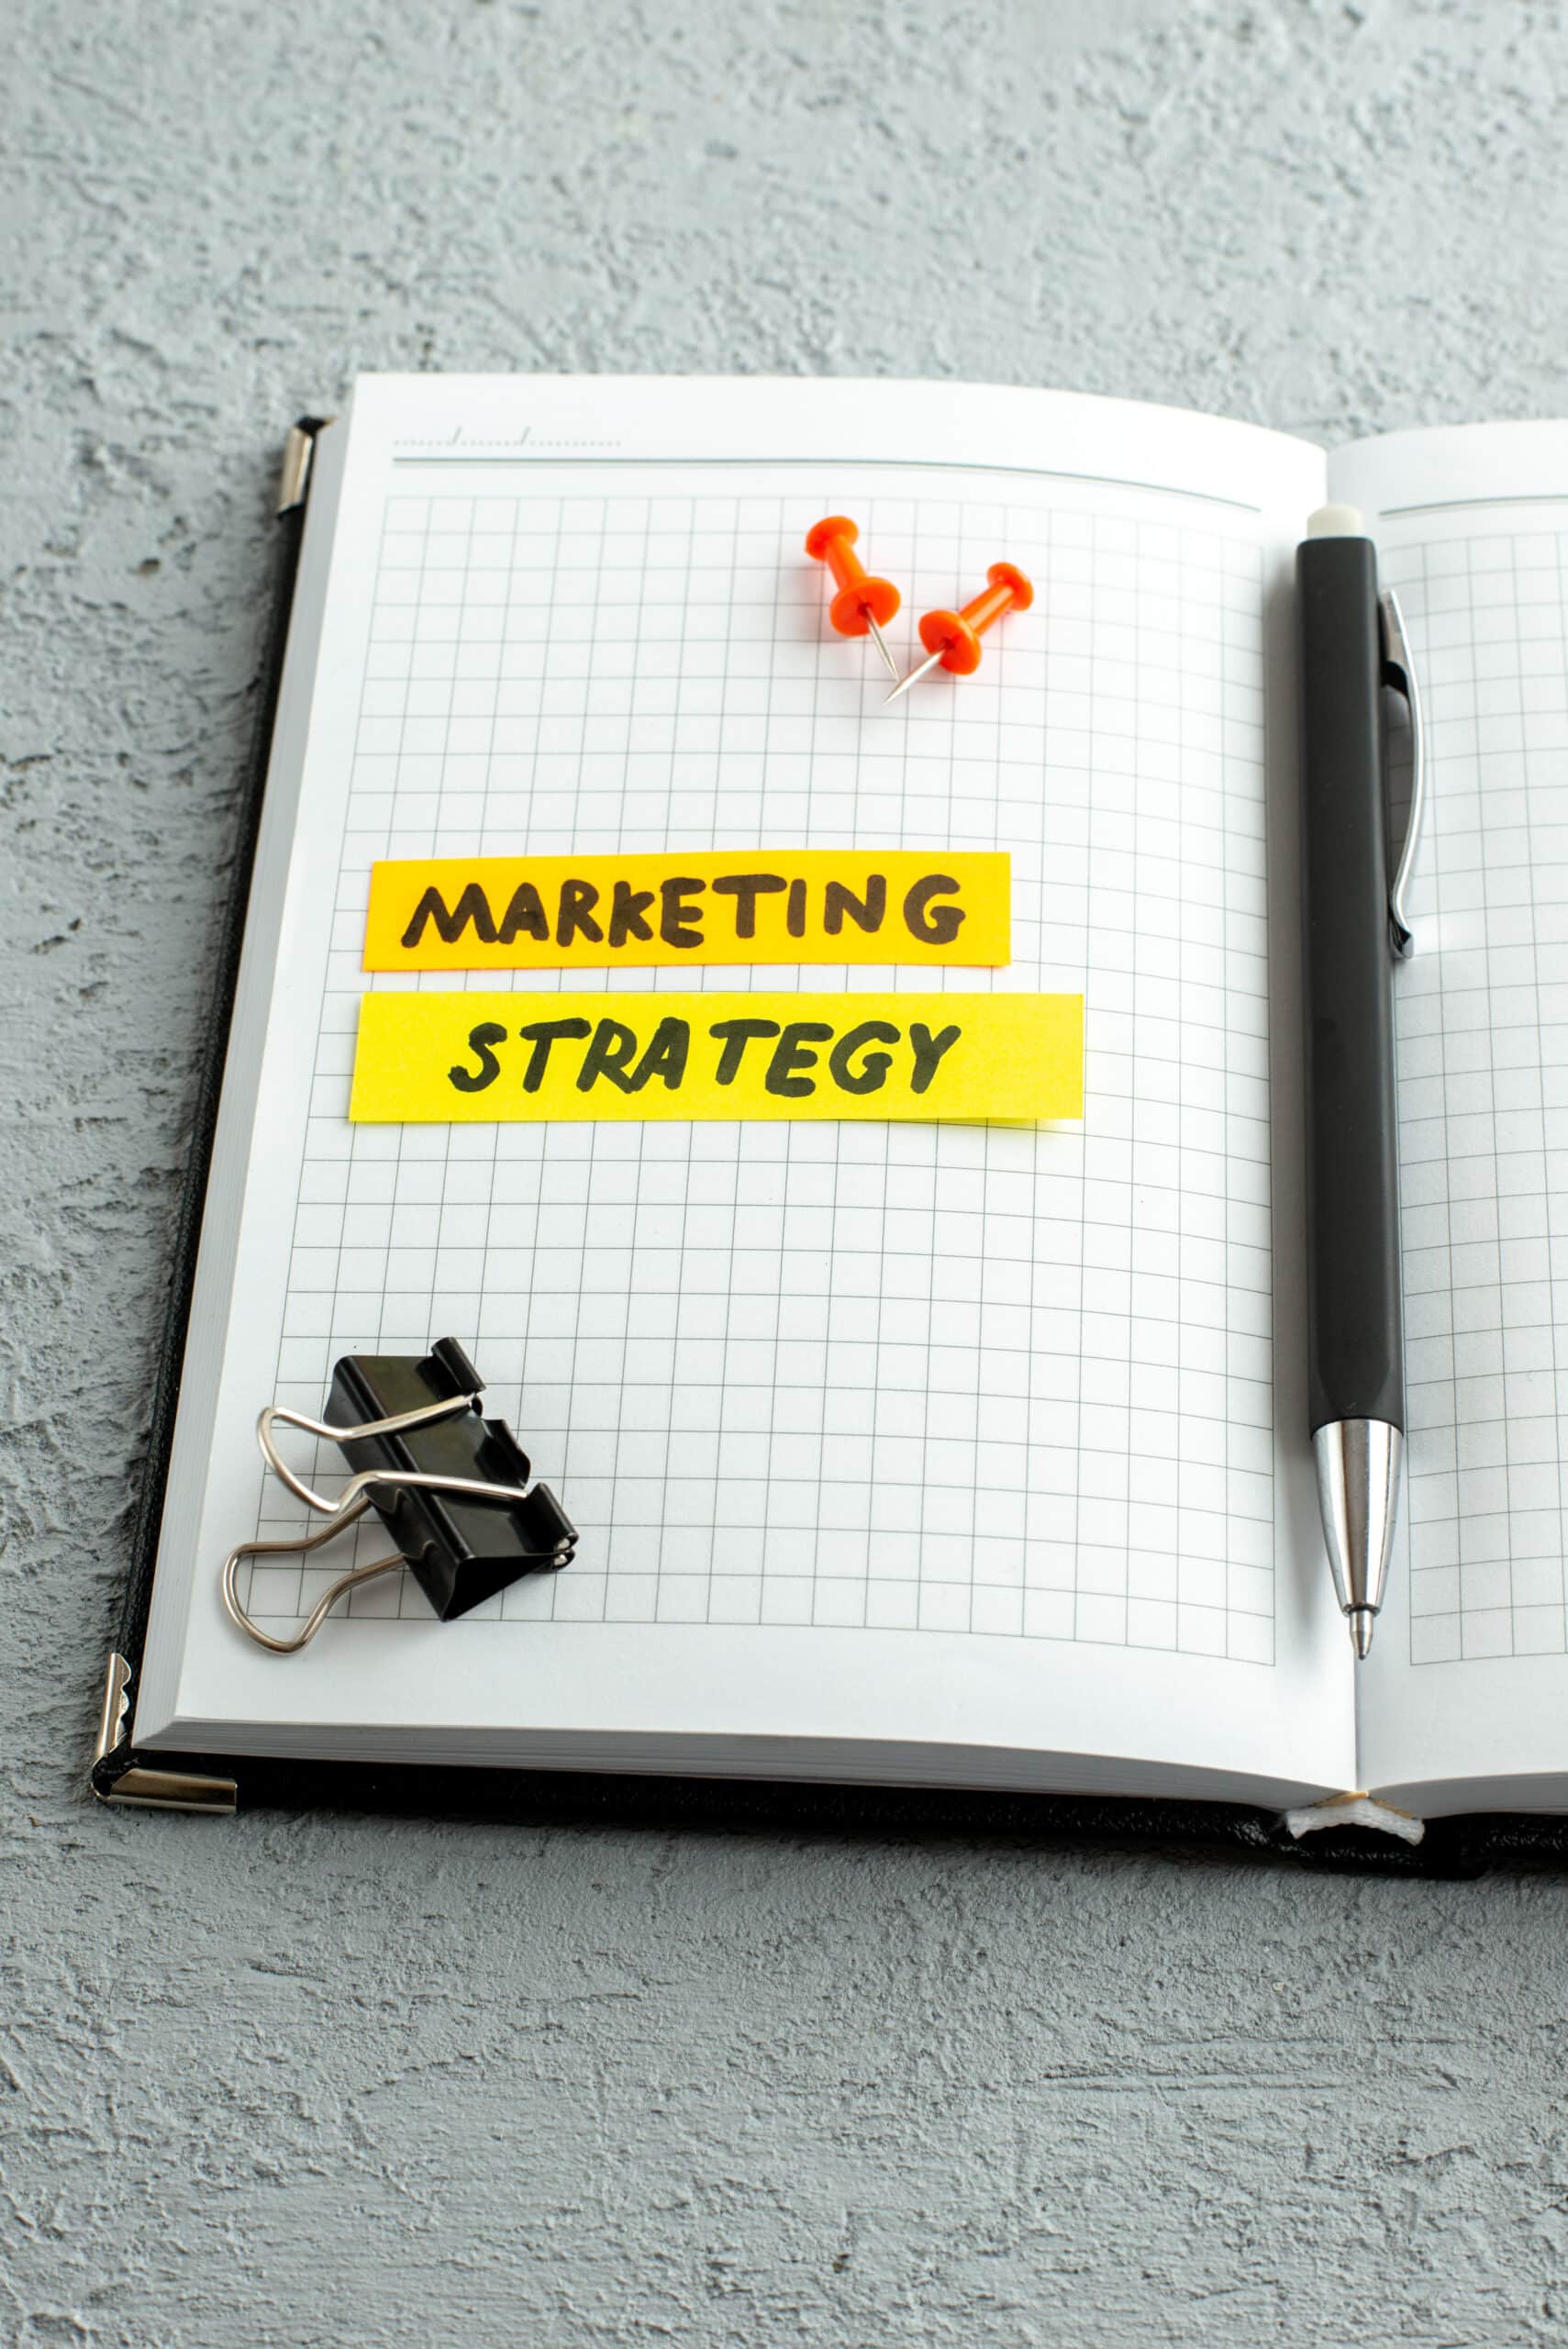 marketing strategy post it notes on a notebook with pen